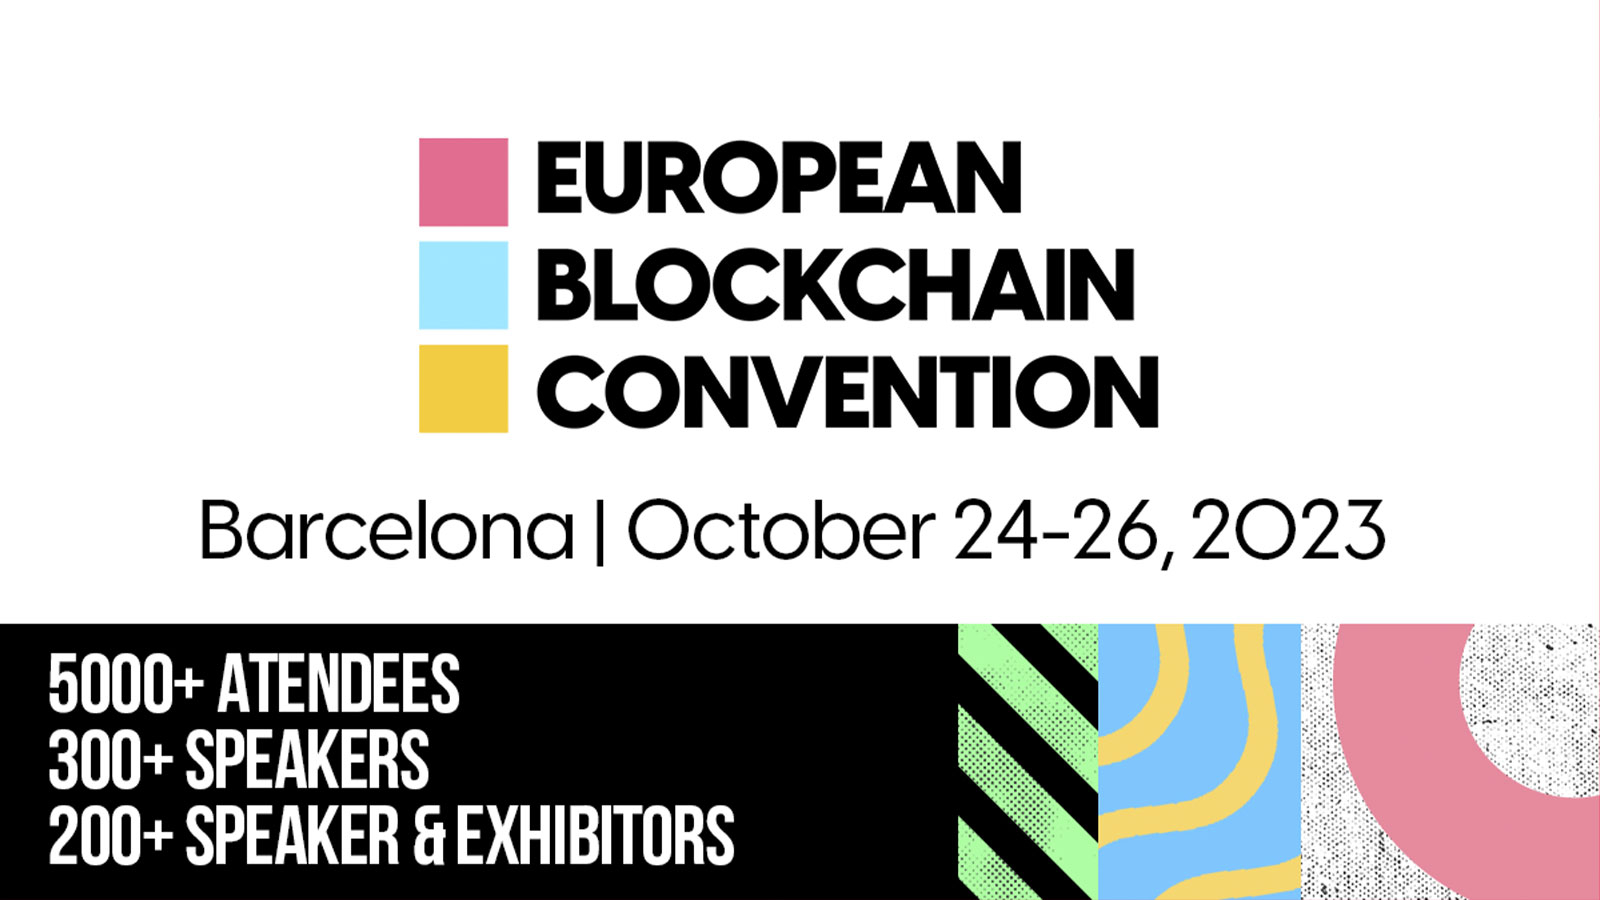 European Blockchain Convention 9, Set to Be Europe’s Largest Blockchain Event in 2H 2023